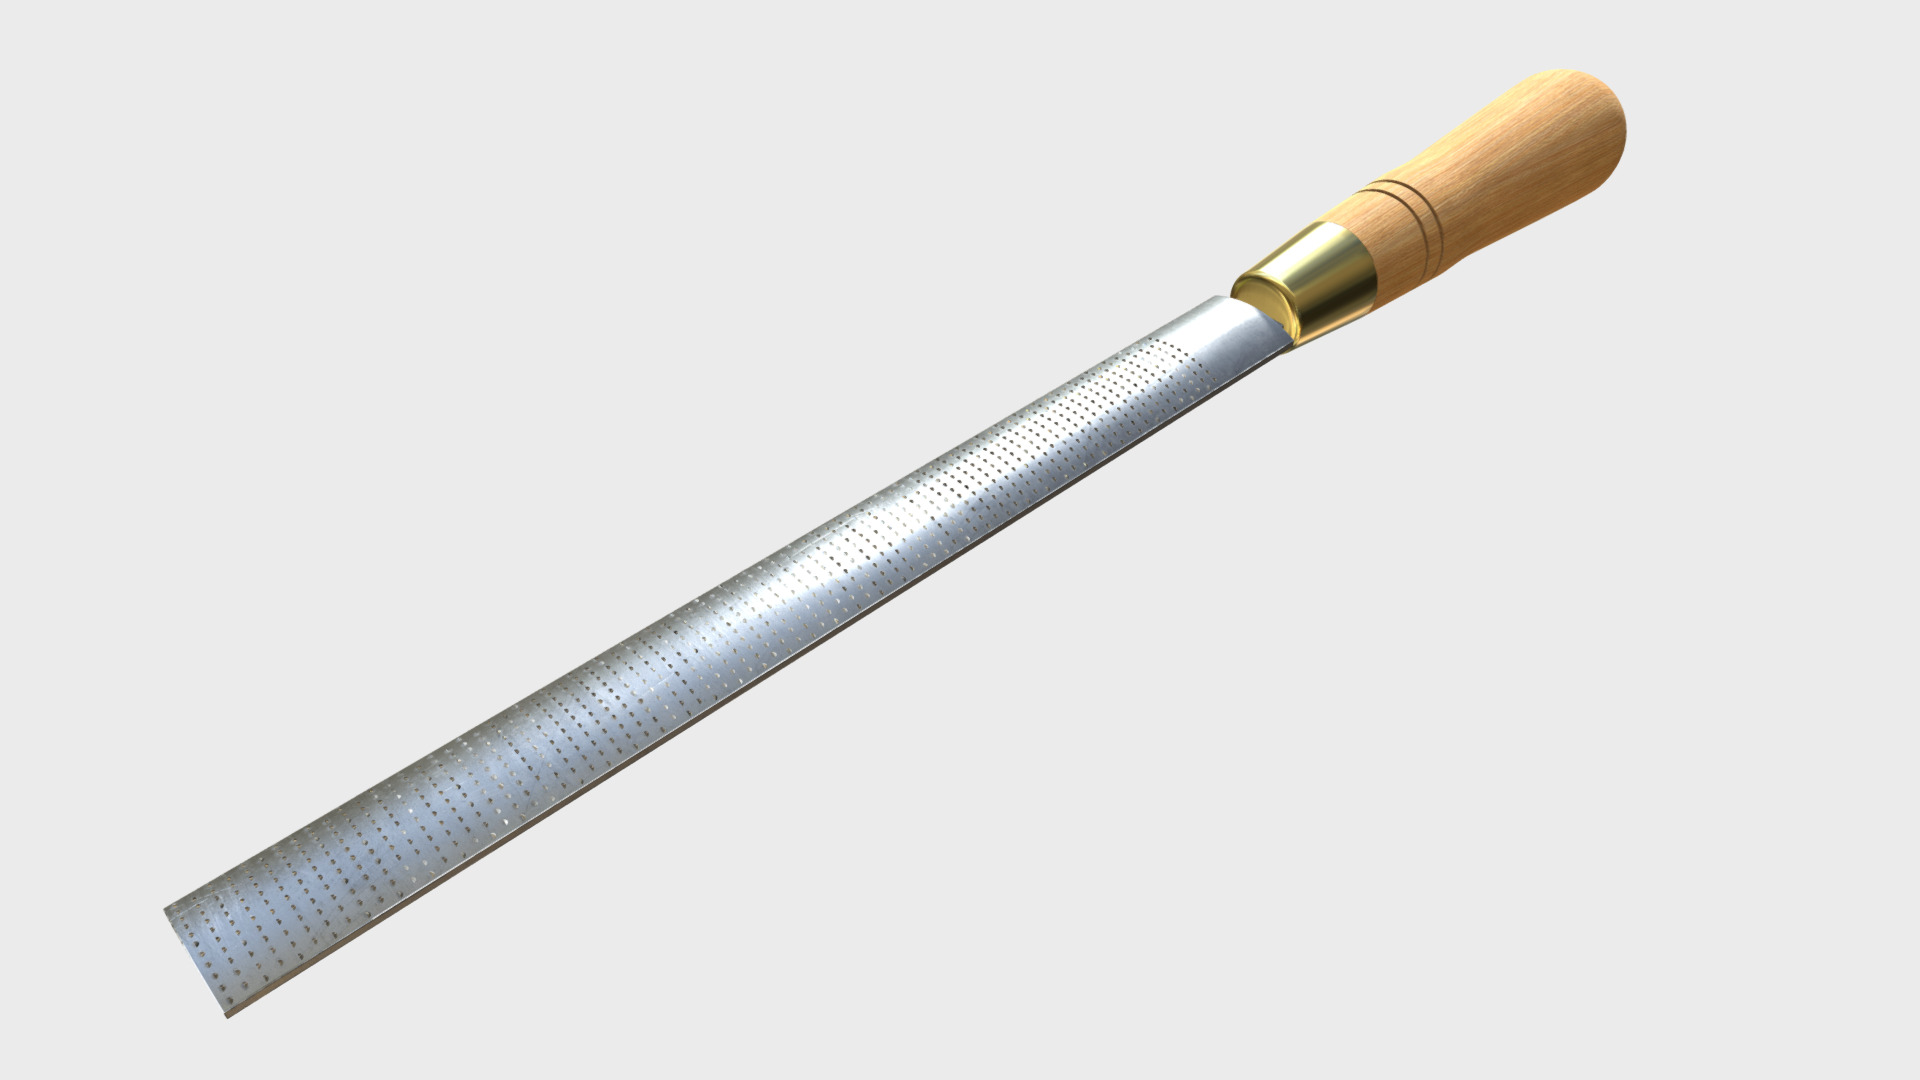 3D model Half round rasp - This is a 3D model of the Half round rasp. The 3D model is about a close-up of a pen.